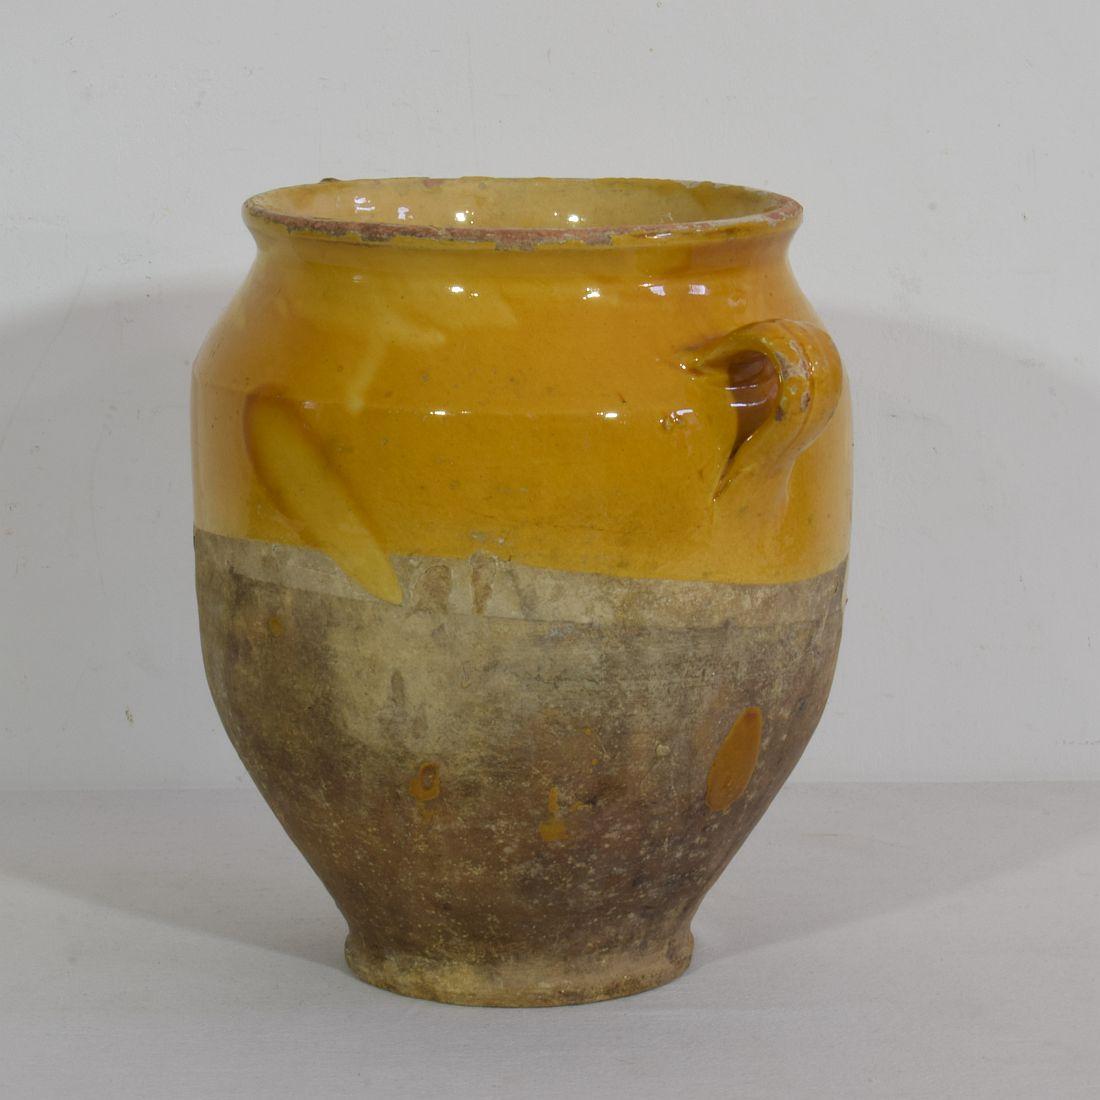 Beautiful confit jar with its characteristic yellow glaze. 
Confit jars were used primarily in the South of France for the preservation of meats such as duck or goose for dishes such as cassoulet or foie gras. The bottom halves were left unglazed,